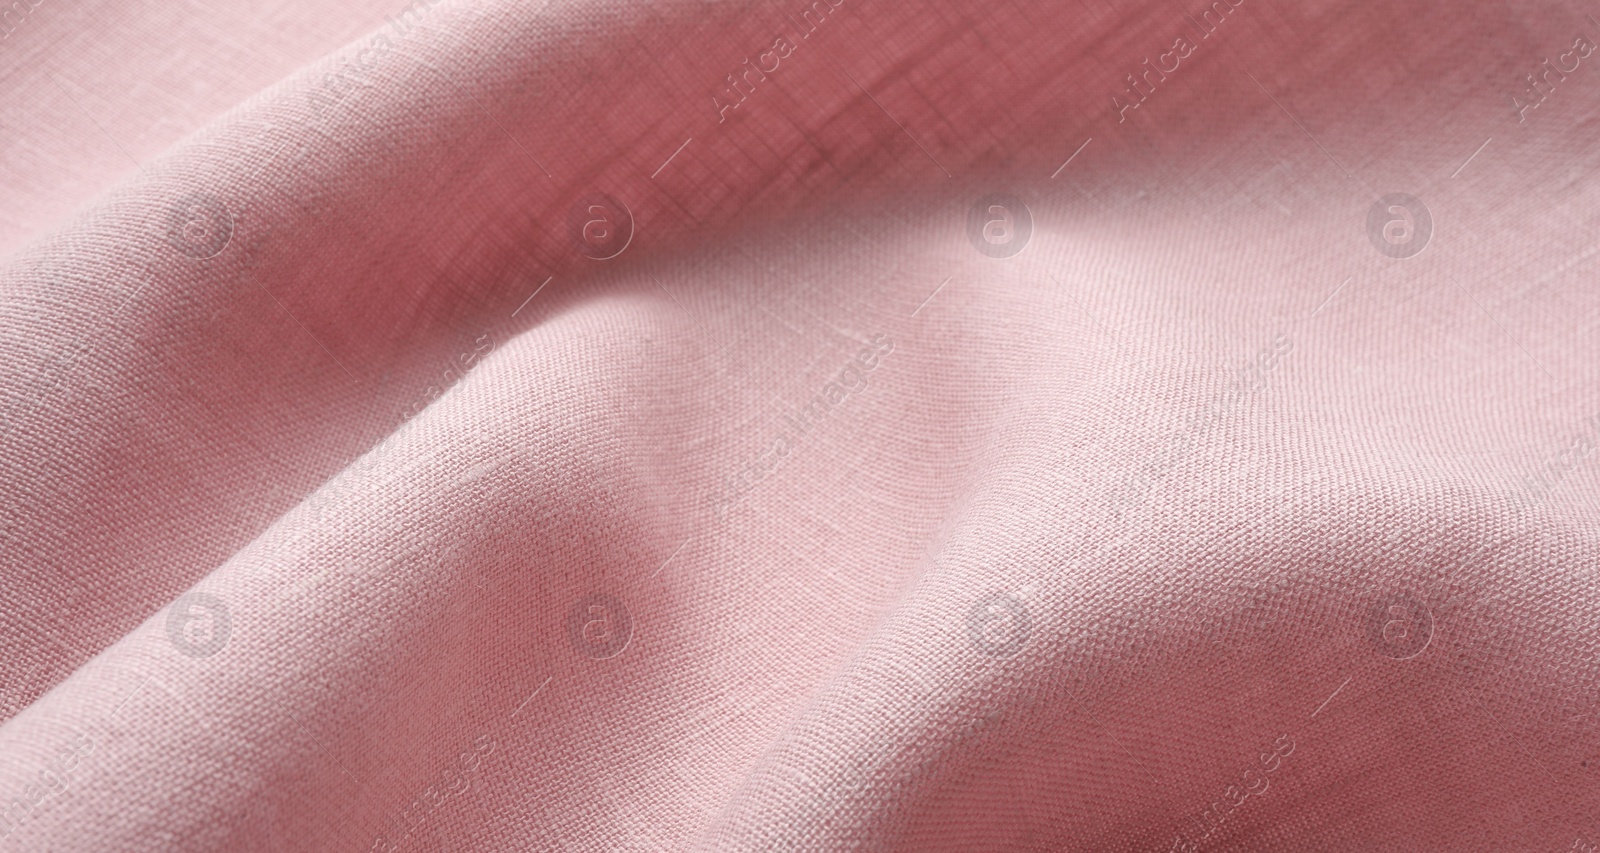 Photo of Texture of pink crumpled fabric as background, closeup